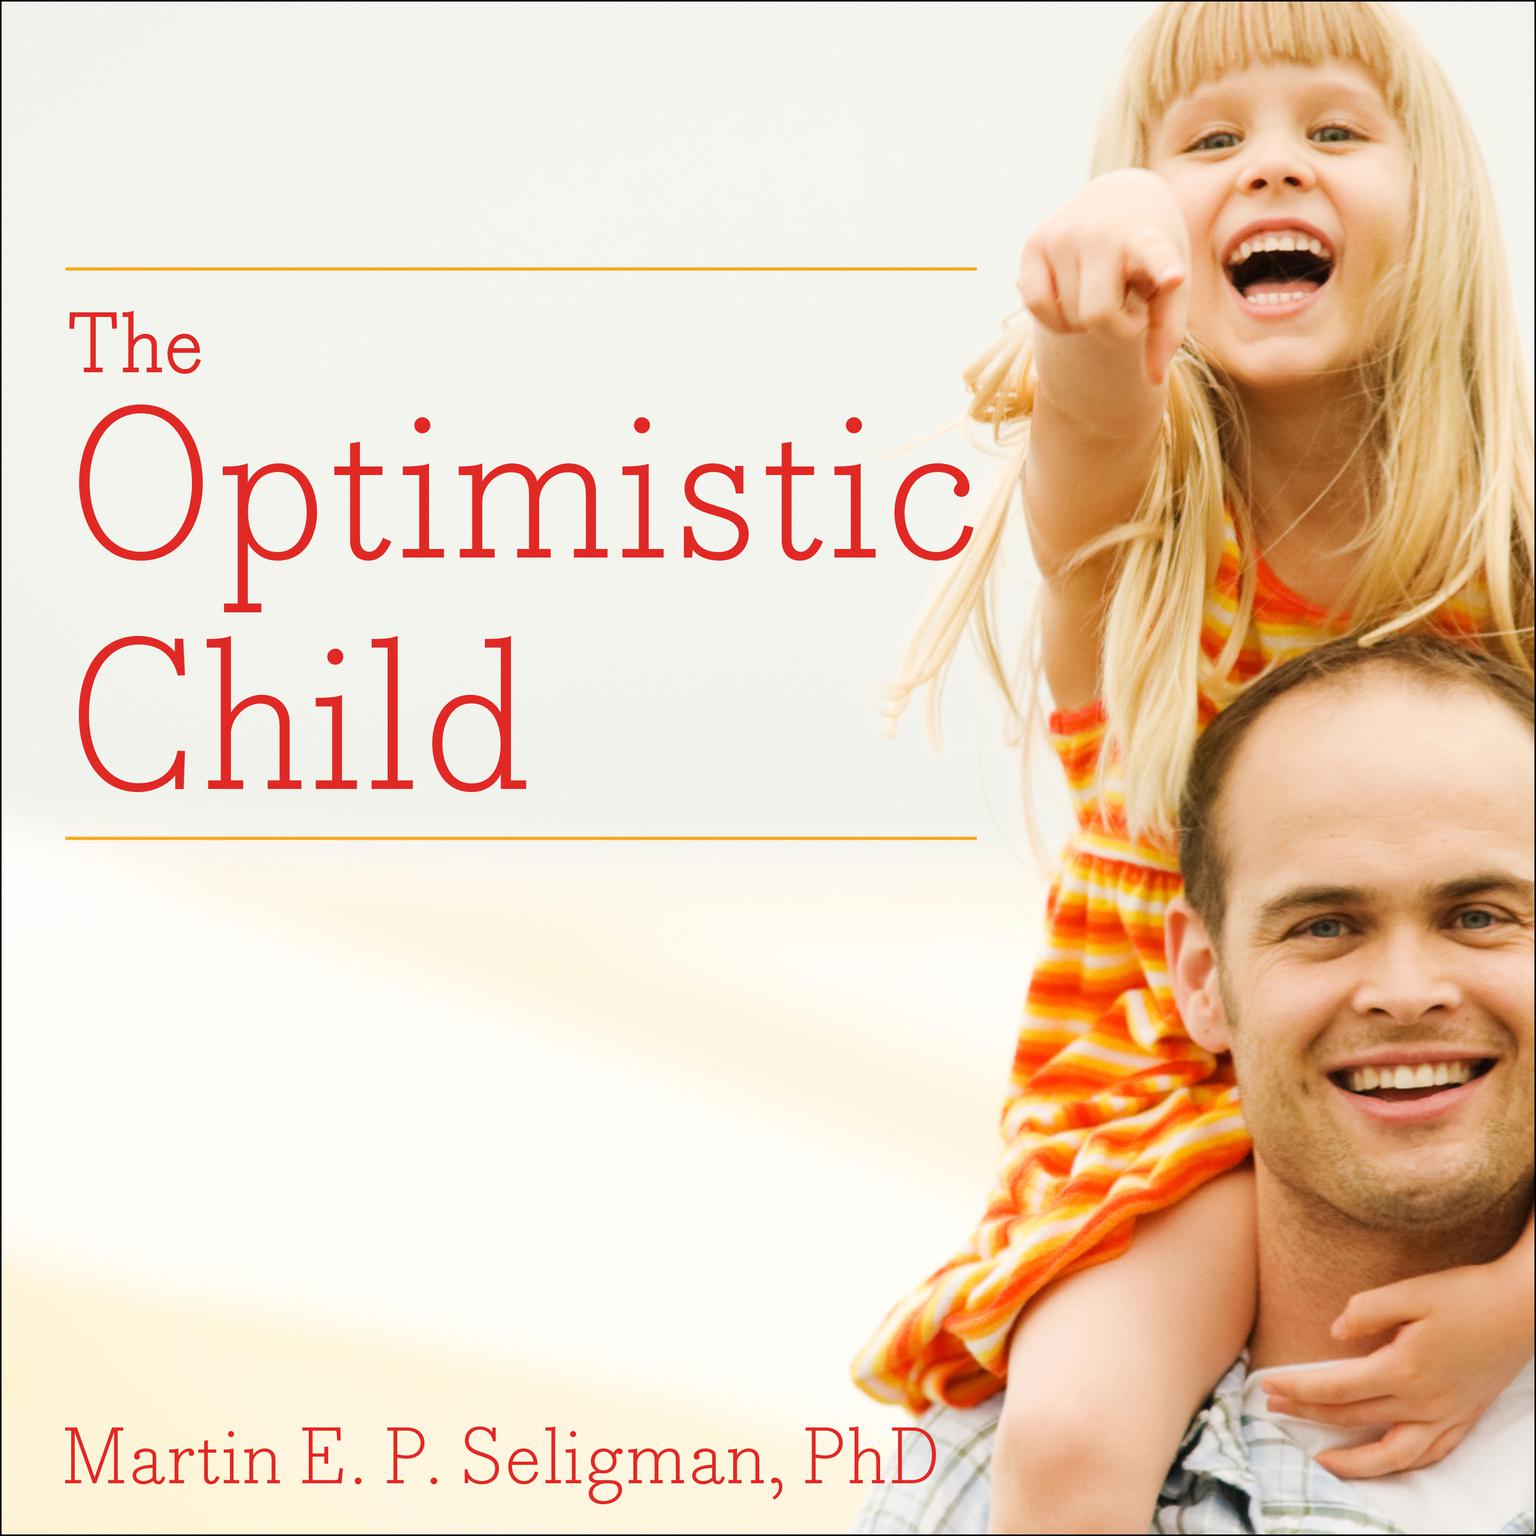 The Optimistic Child: A Proven Program to Safeguard Children Against Depression and Build Lifelong Resilience Audiobook, by Martin  E. P. Seligman